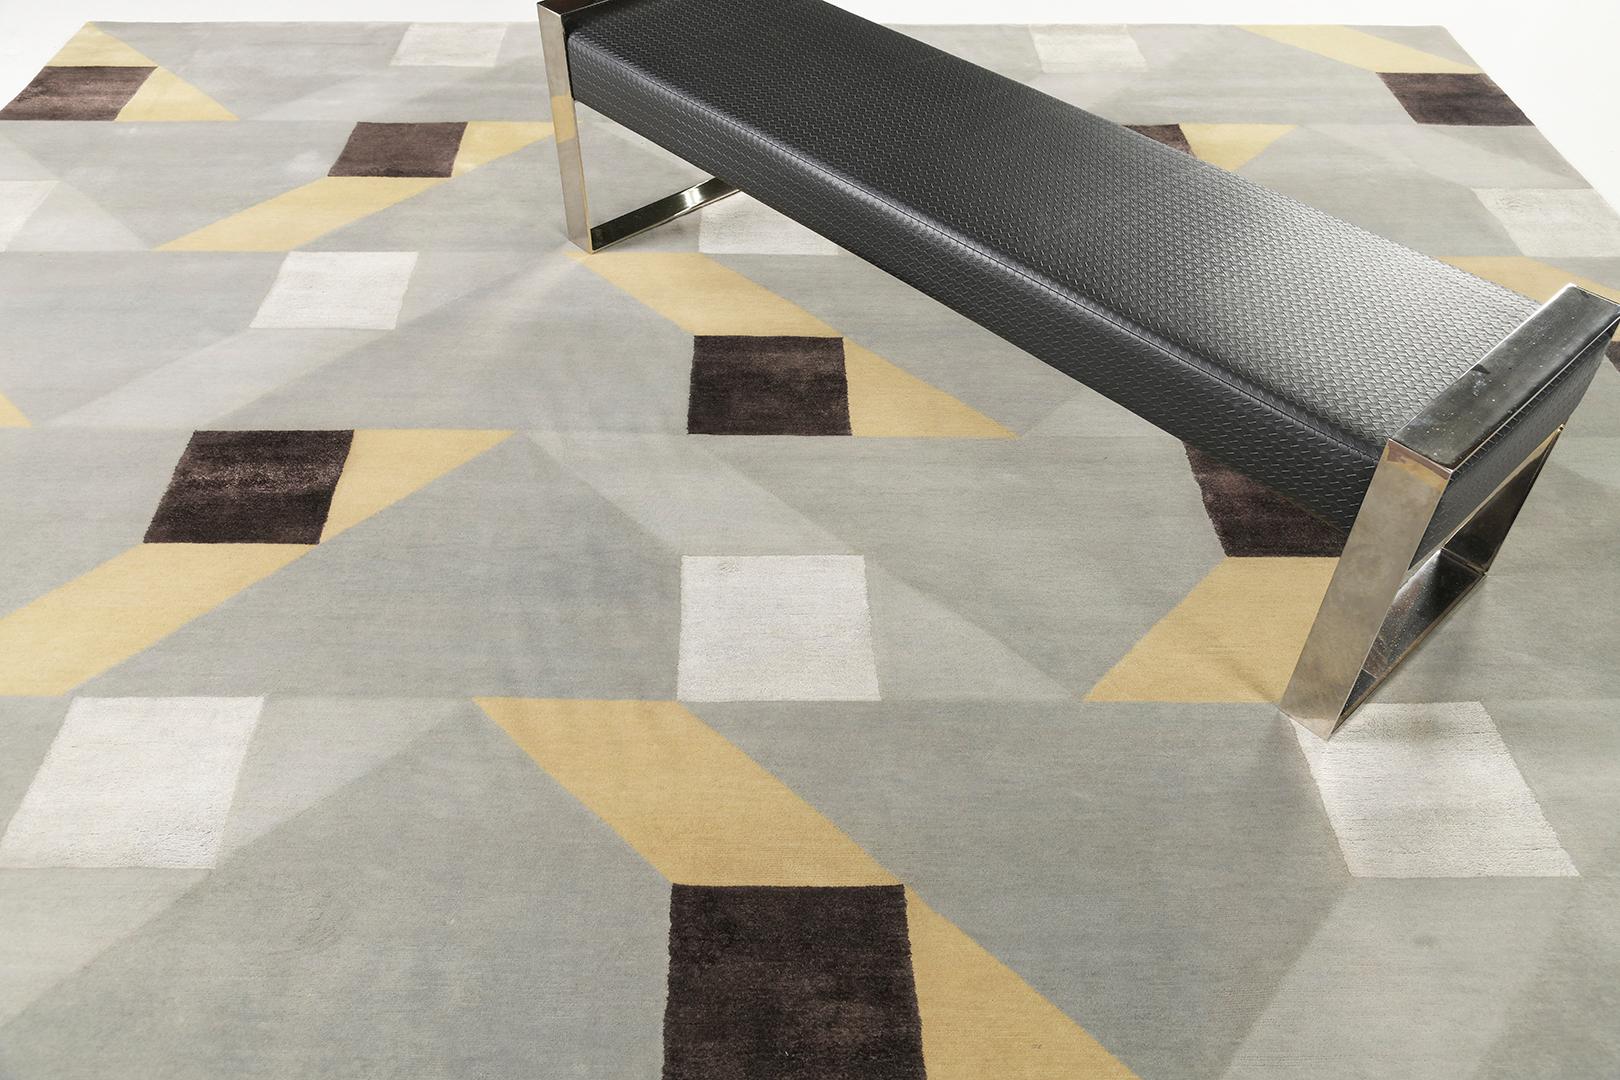 Ragione’ is made from elegant wool and silk. It is a part of the Design Rhymes Collection which pulls inspiration from different aspects of architecture. Featuring the kaleidoscopic effect from the geometrical and linear patterns, this rug brings